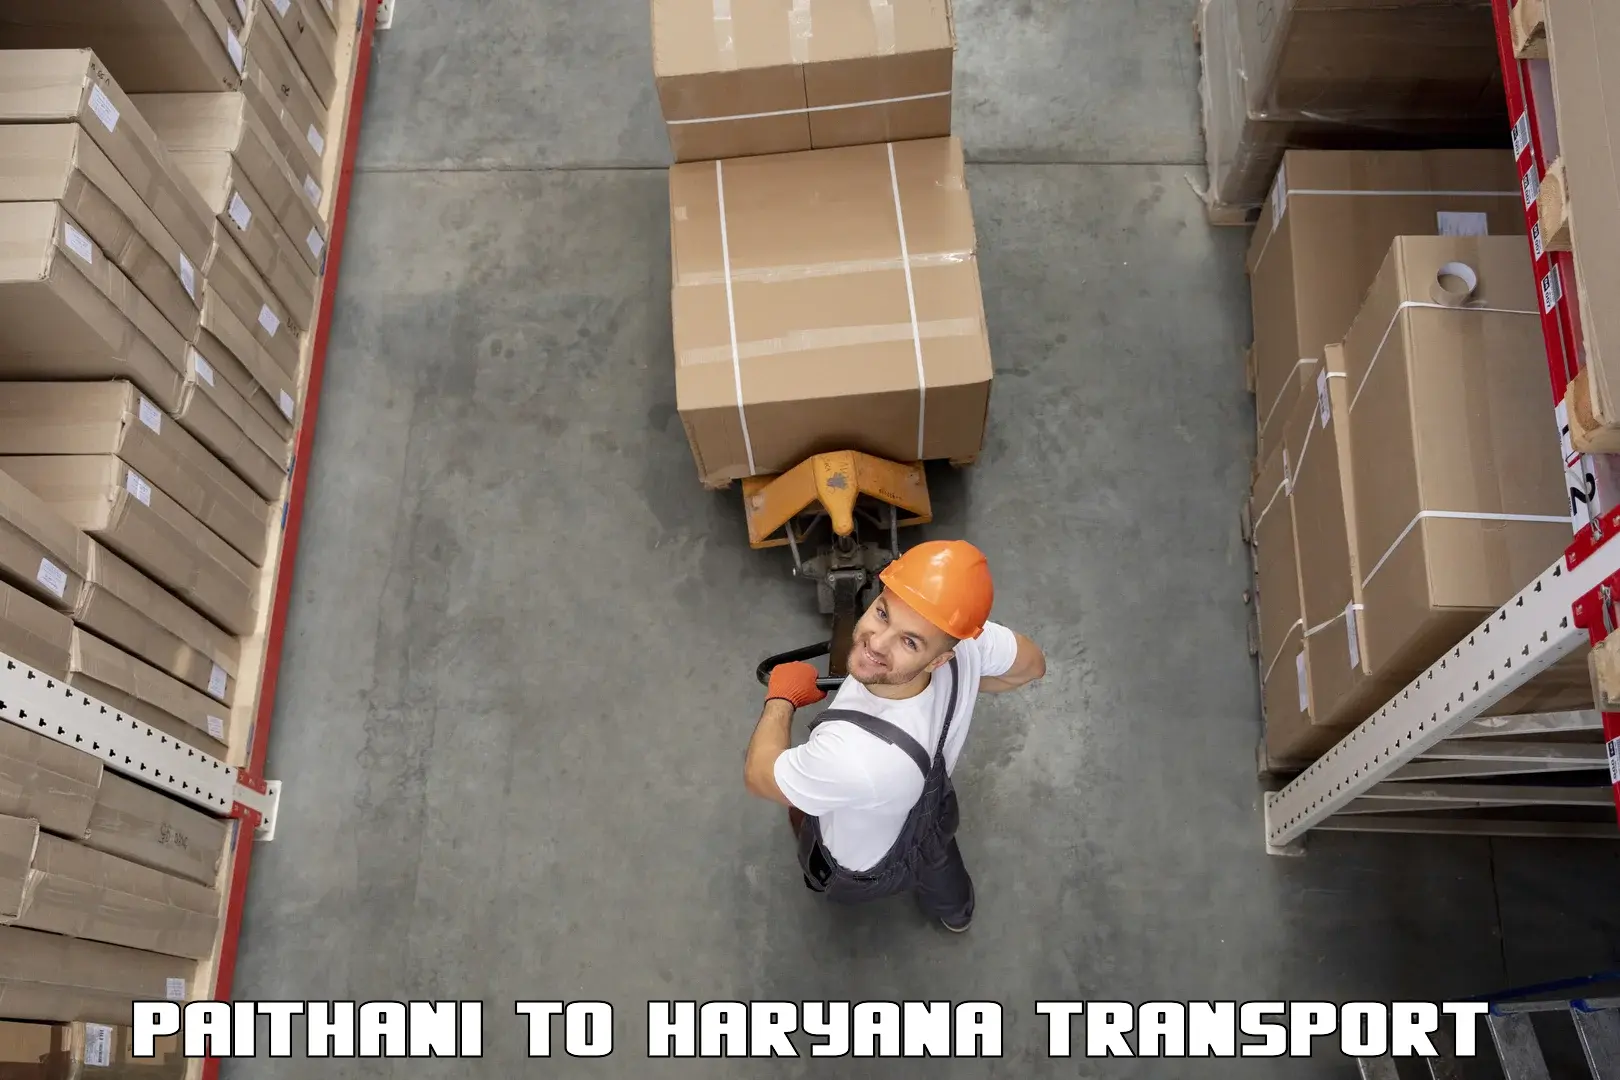 Container transport service Paithani to Siwani